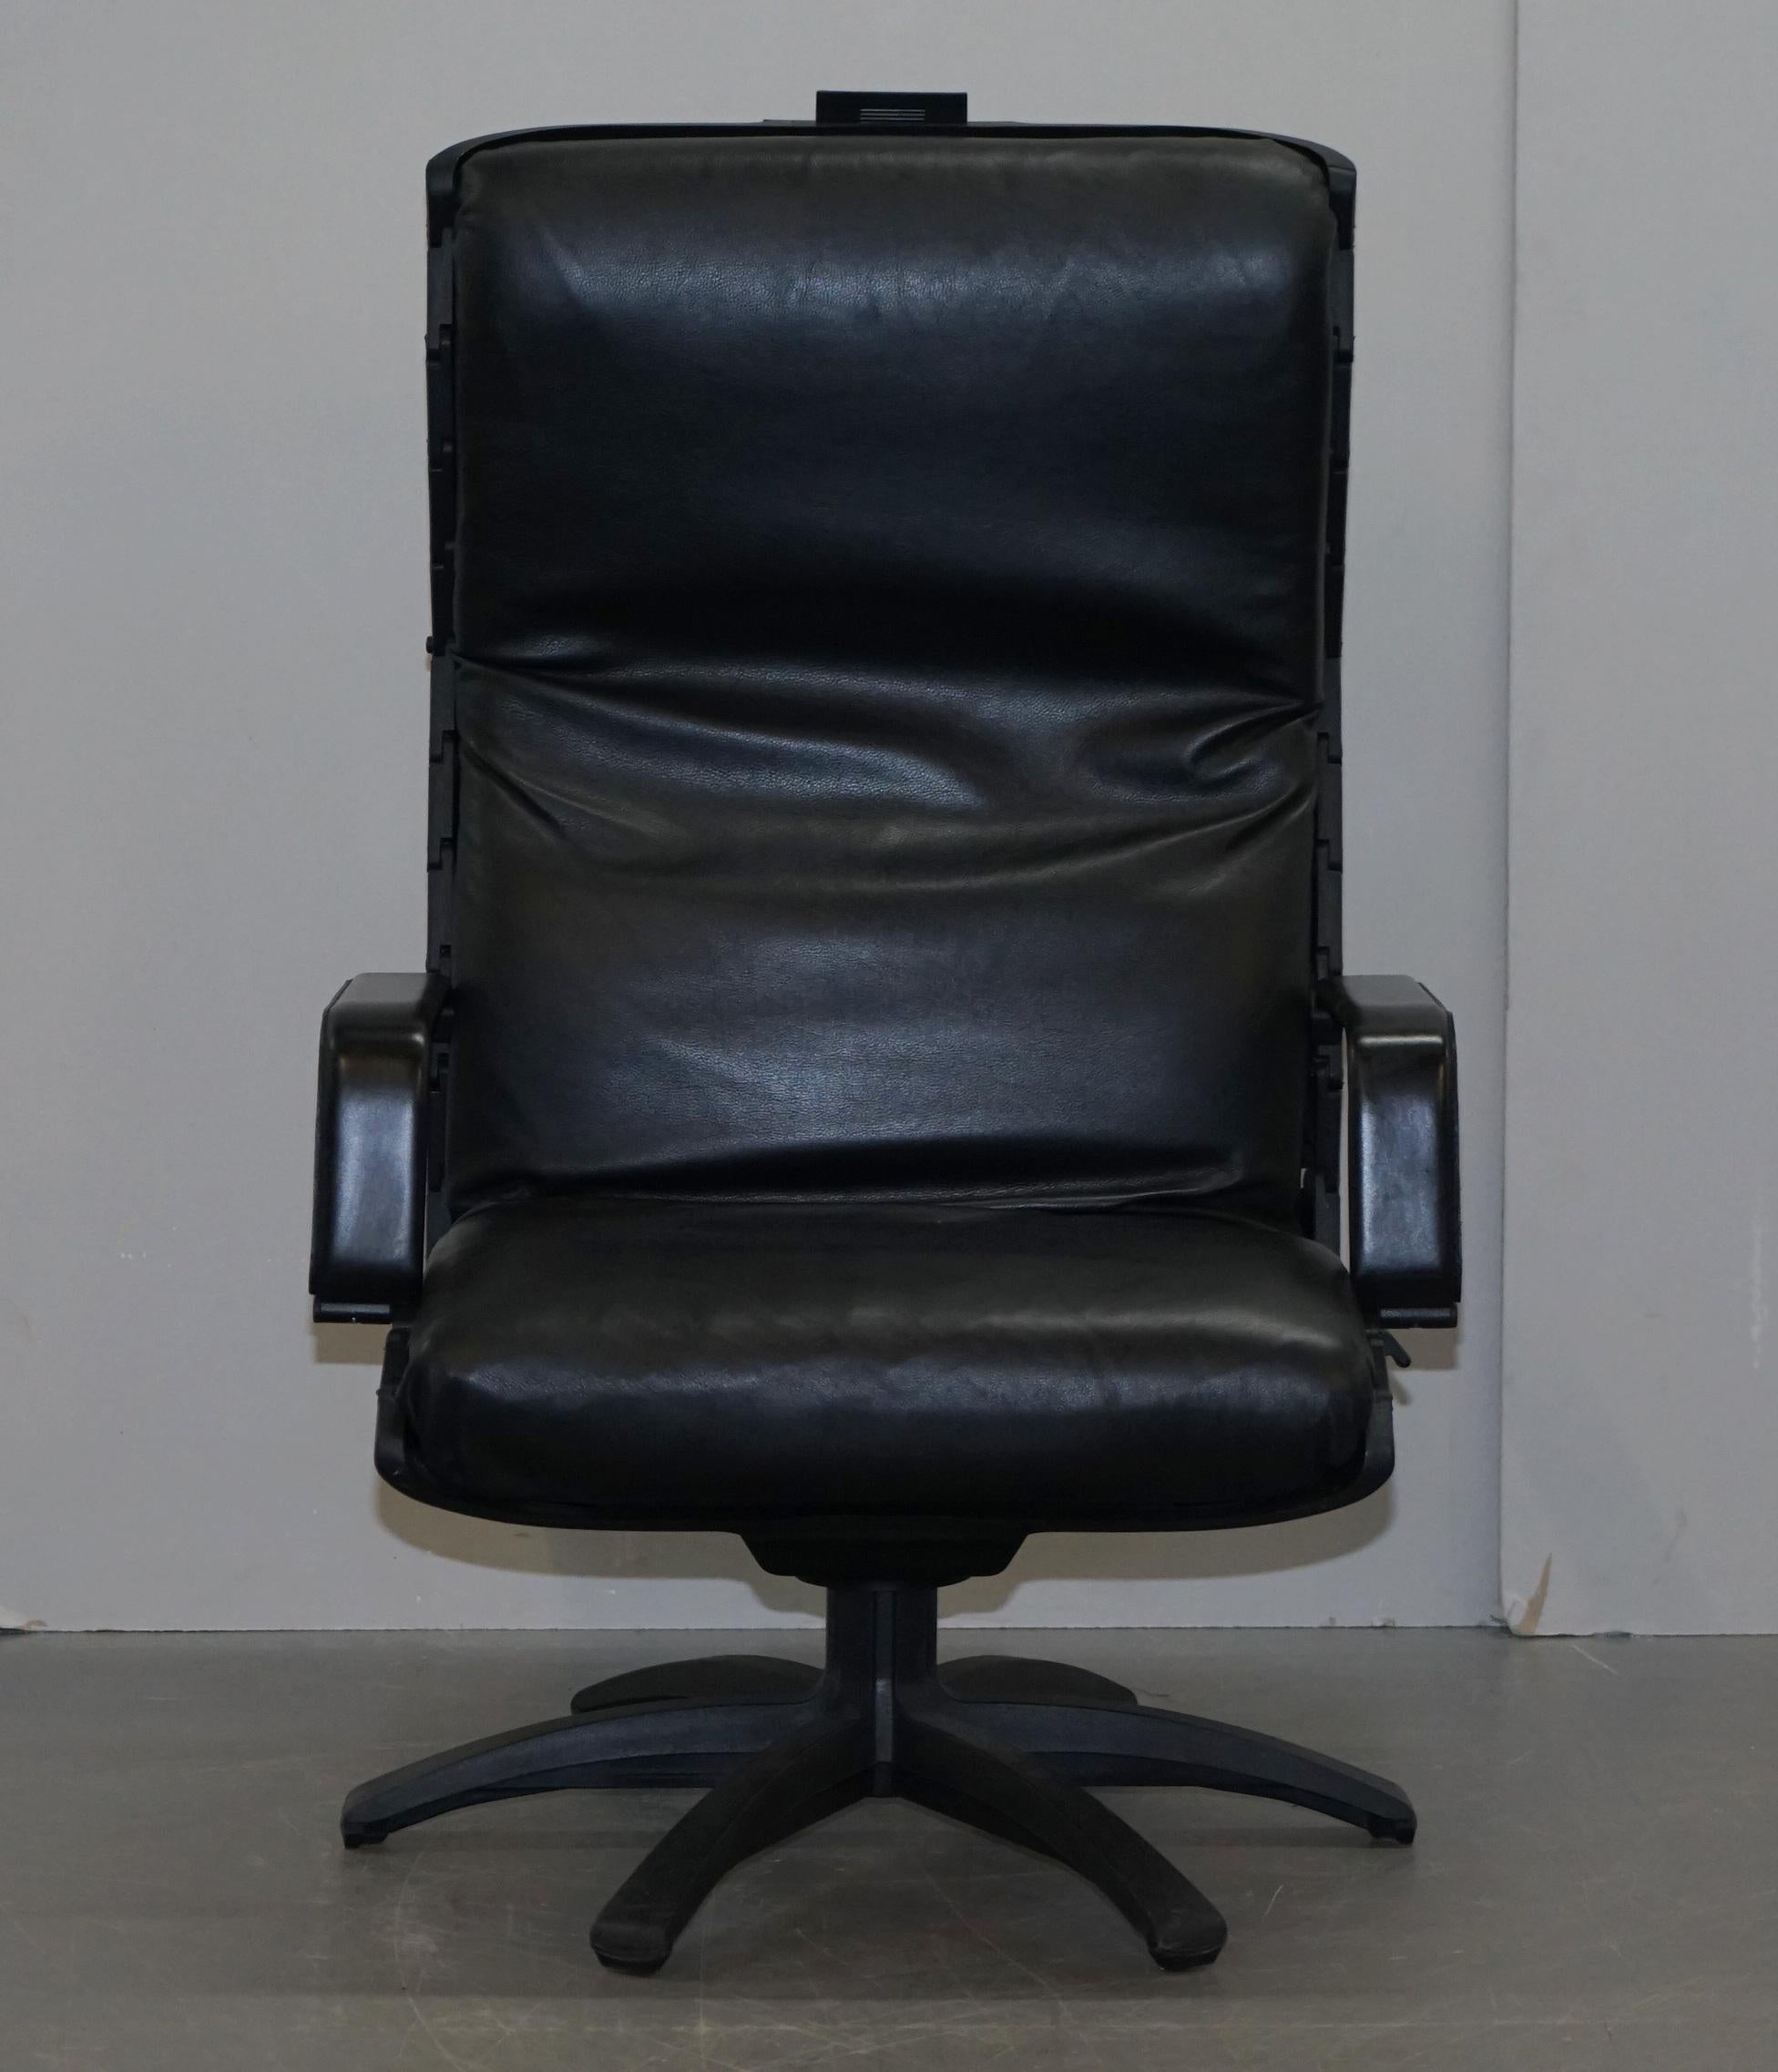 We are delighted to offer for sale this lovely Porsche designed by Ferdinand for Poltrona Frau black leather office swivel armchair

Designed by Ferdinand via Porsche for Poltrona Frau. This chair has a very high back which has adjustable ribs in